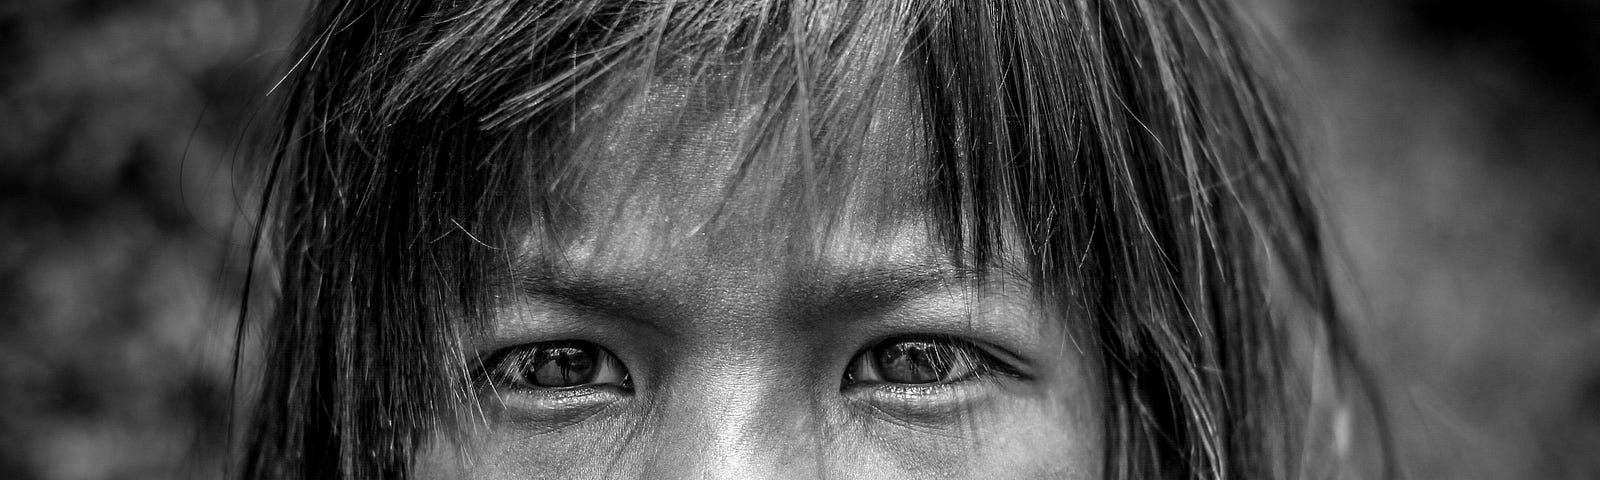 Black and white portrait of Nepalese child looking thoughtful